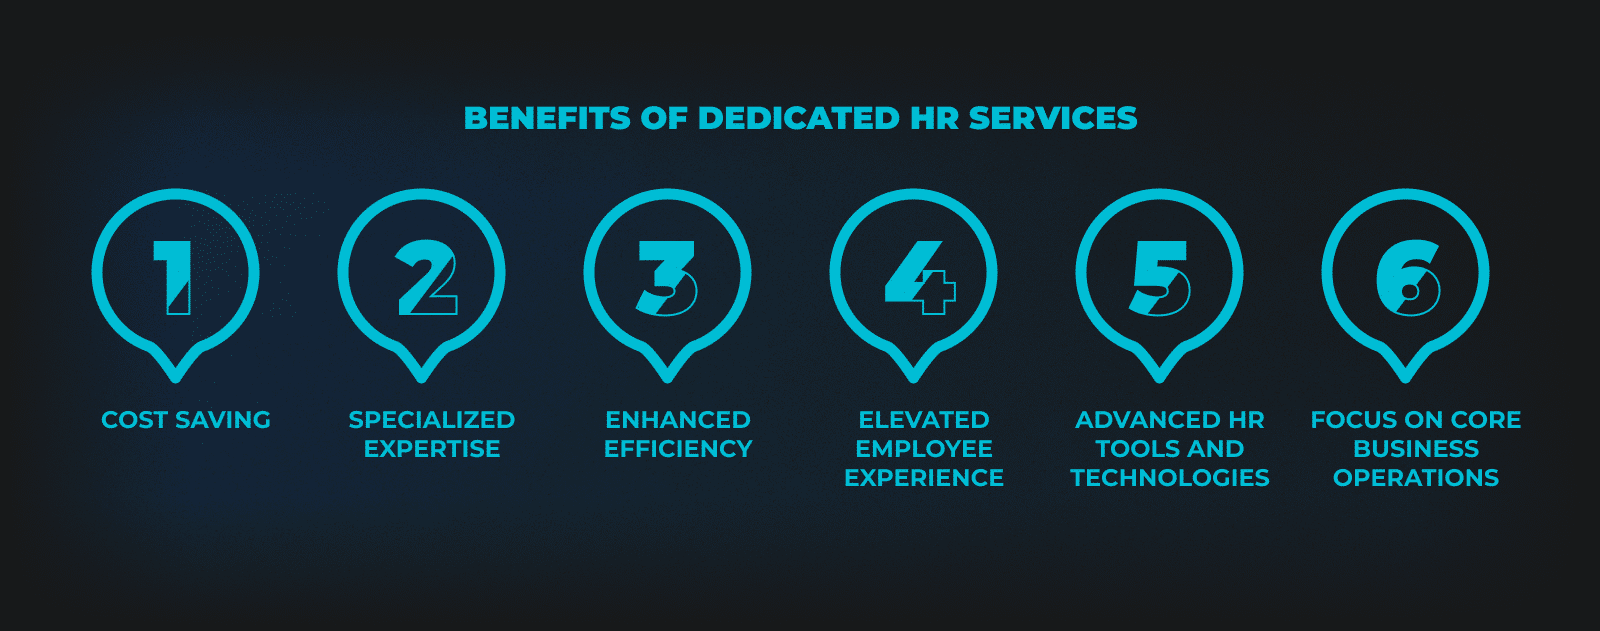 Benefits of Dedicated HR Services